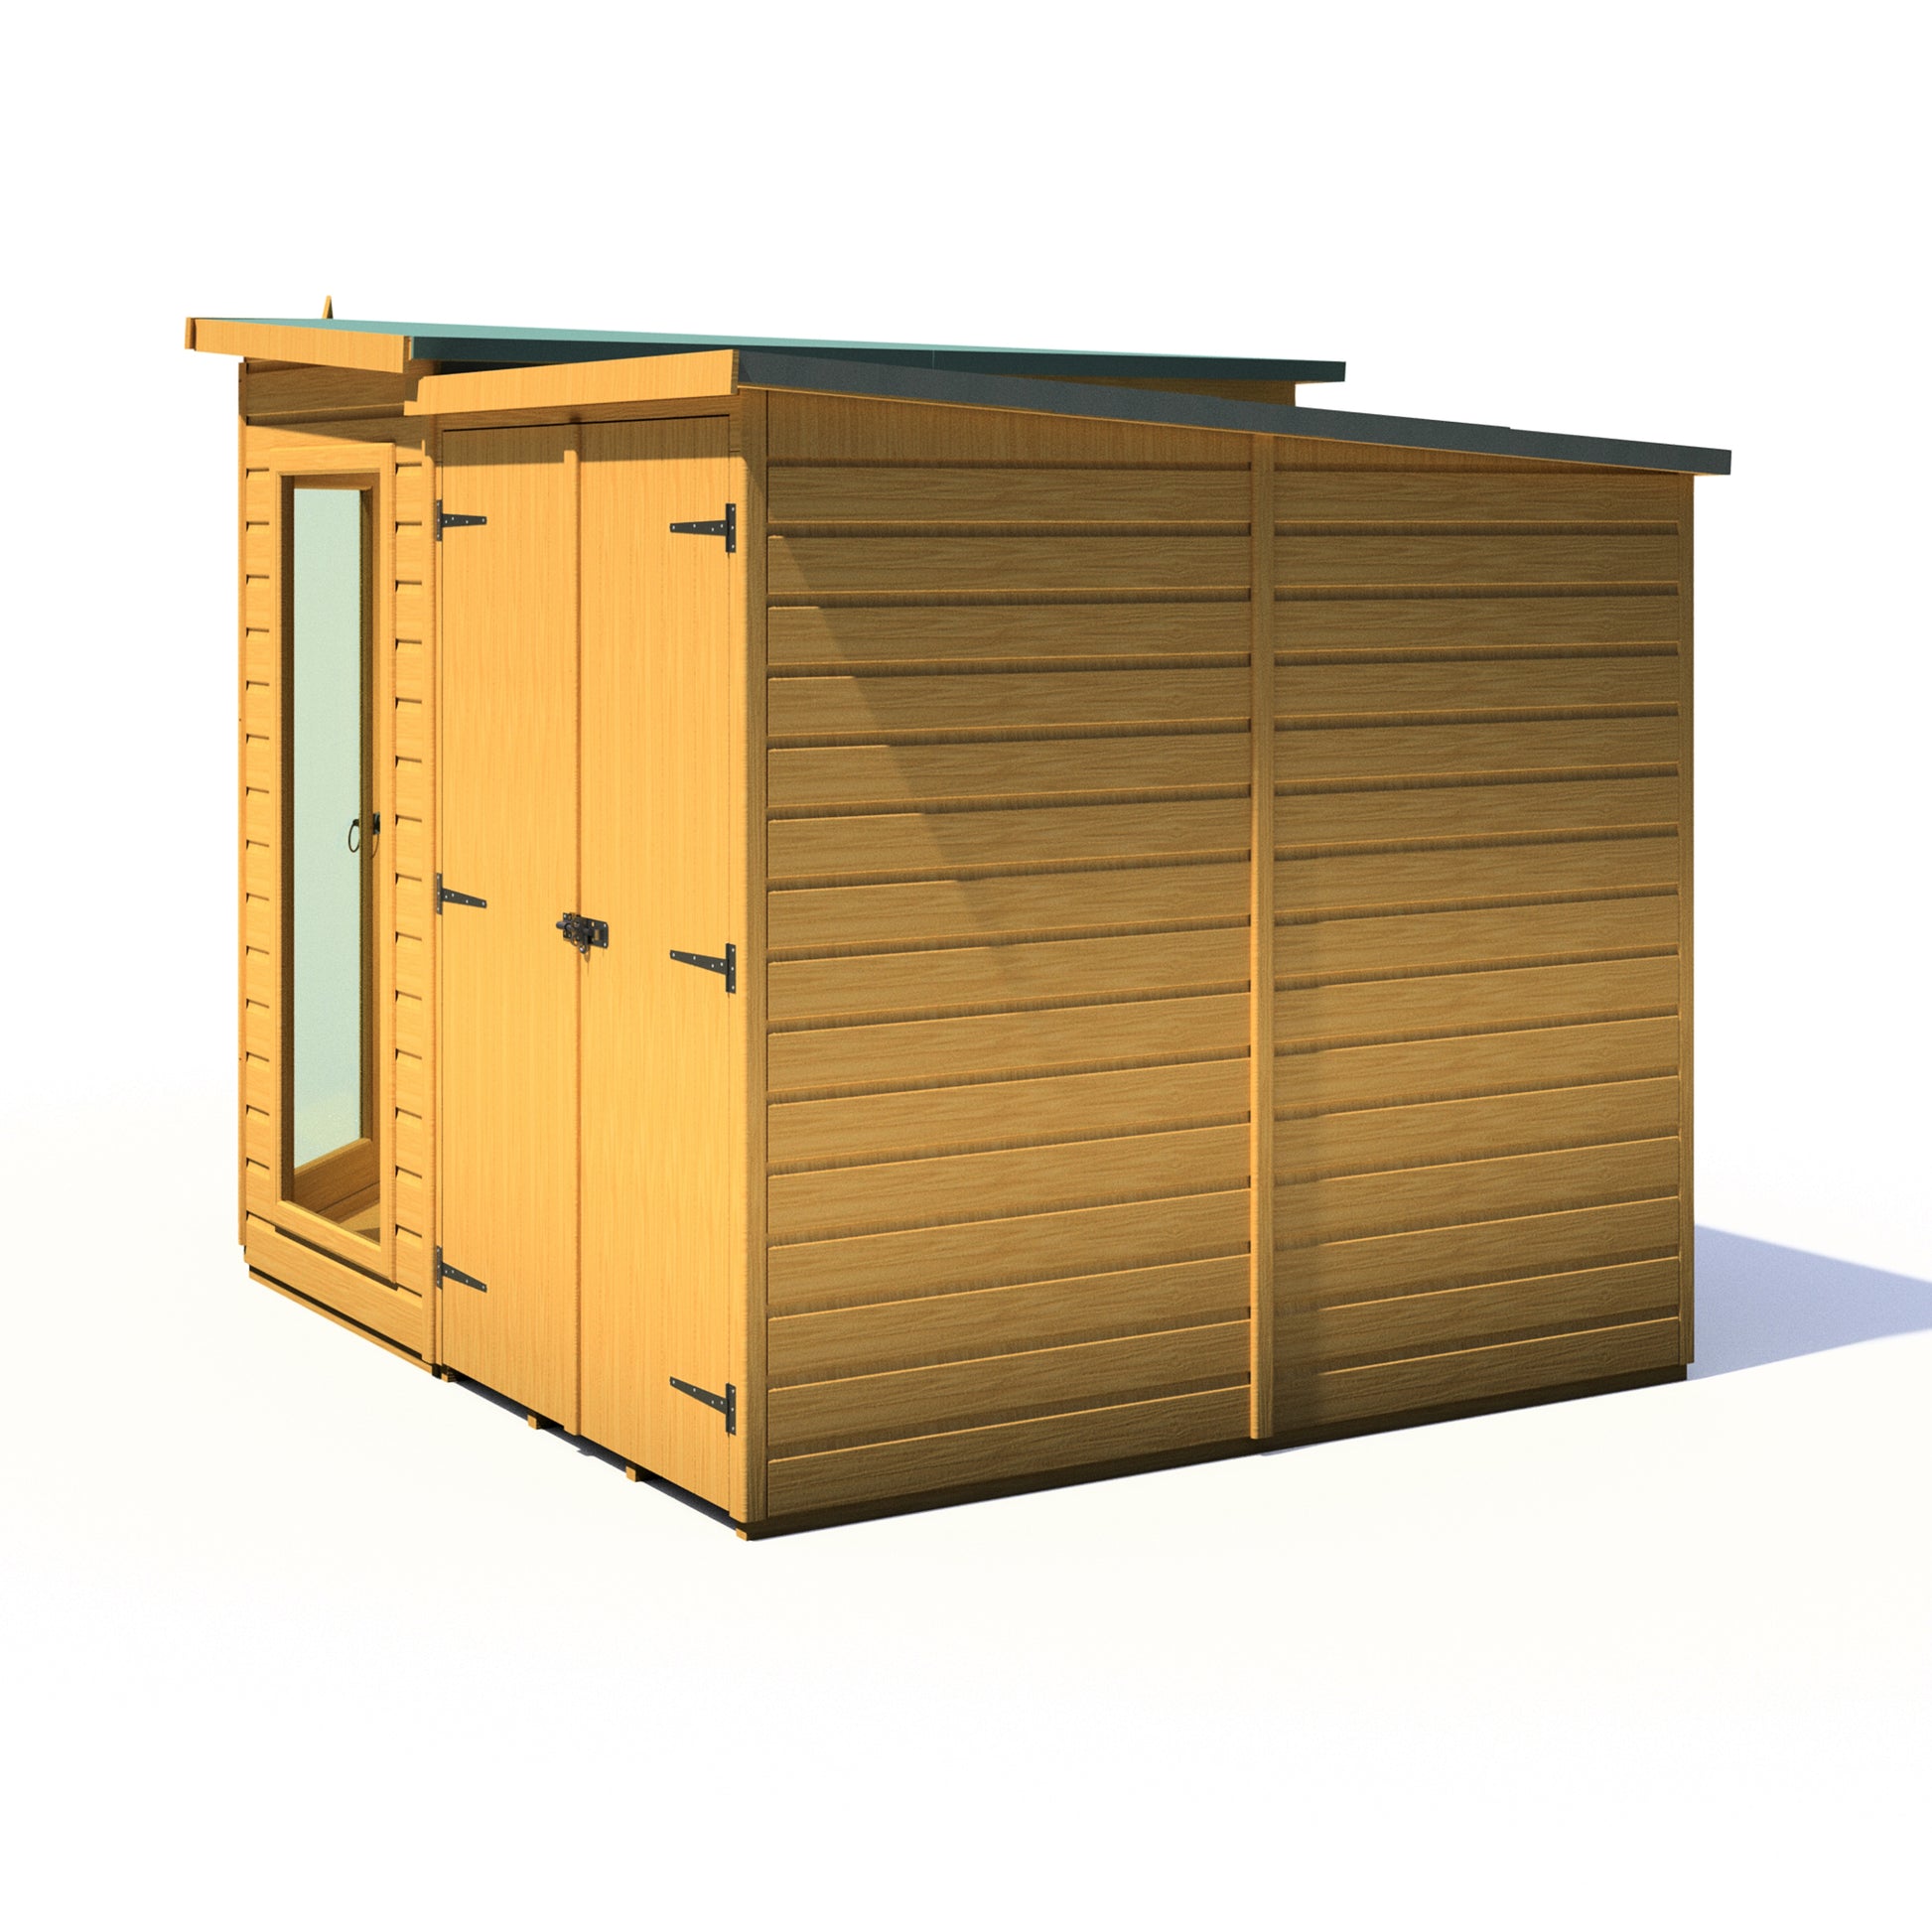 Shire 7 X 11 Barclay with side shed  Summerhouse - Premium Garden